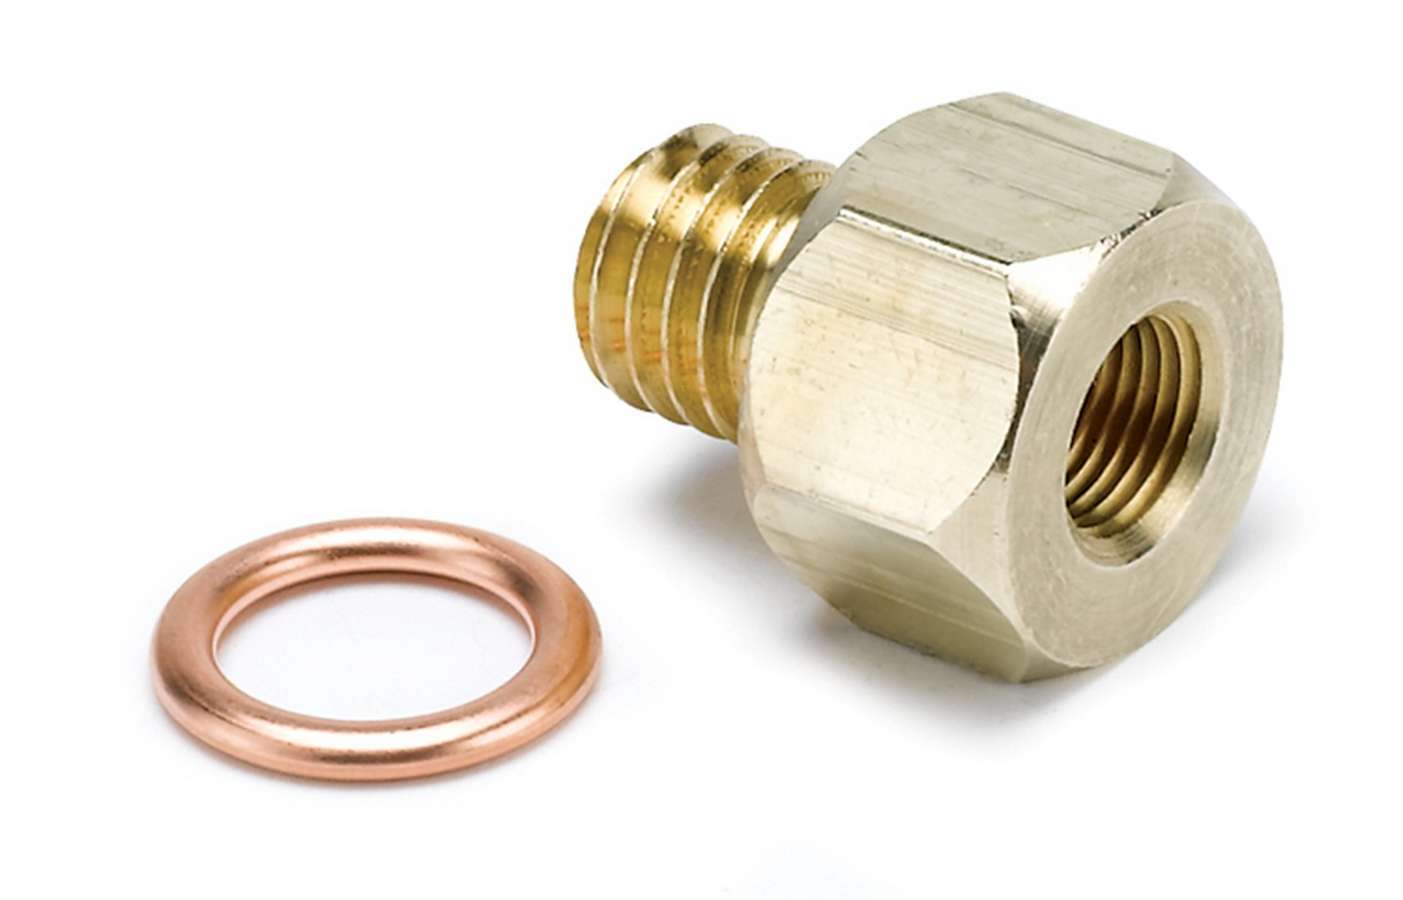 Auto Meter Fitting, Adapter, Straight, 12 mm x 1.75 Male to 1/8" NPT Female, Brass, Natural, Electric Temperature/Pressure Gauge